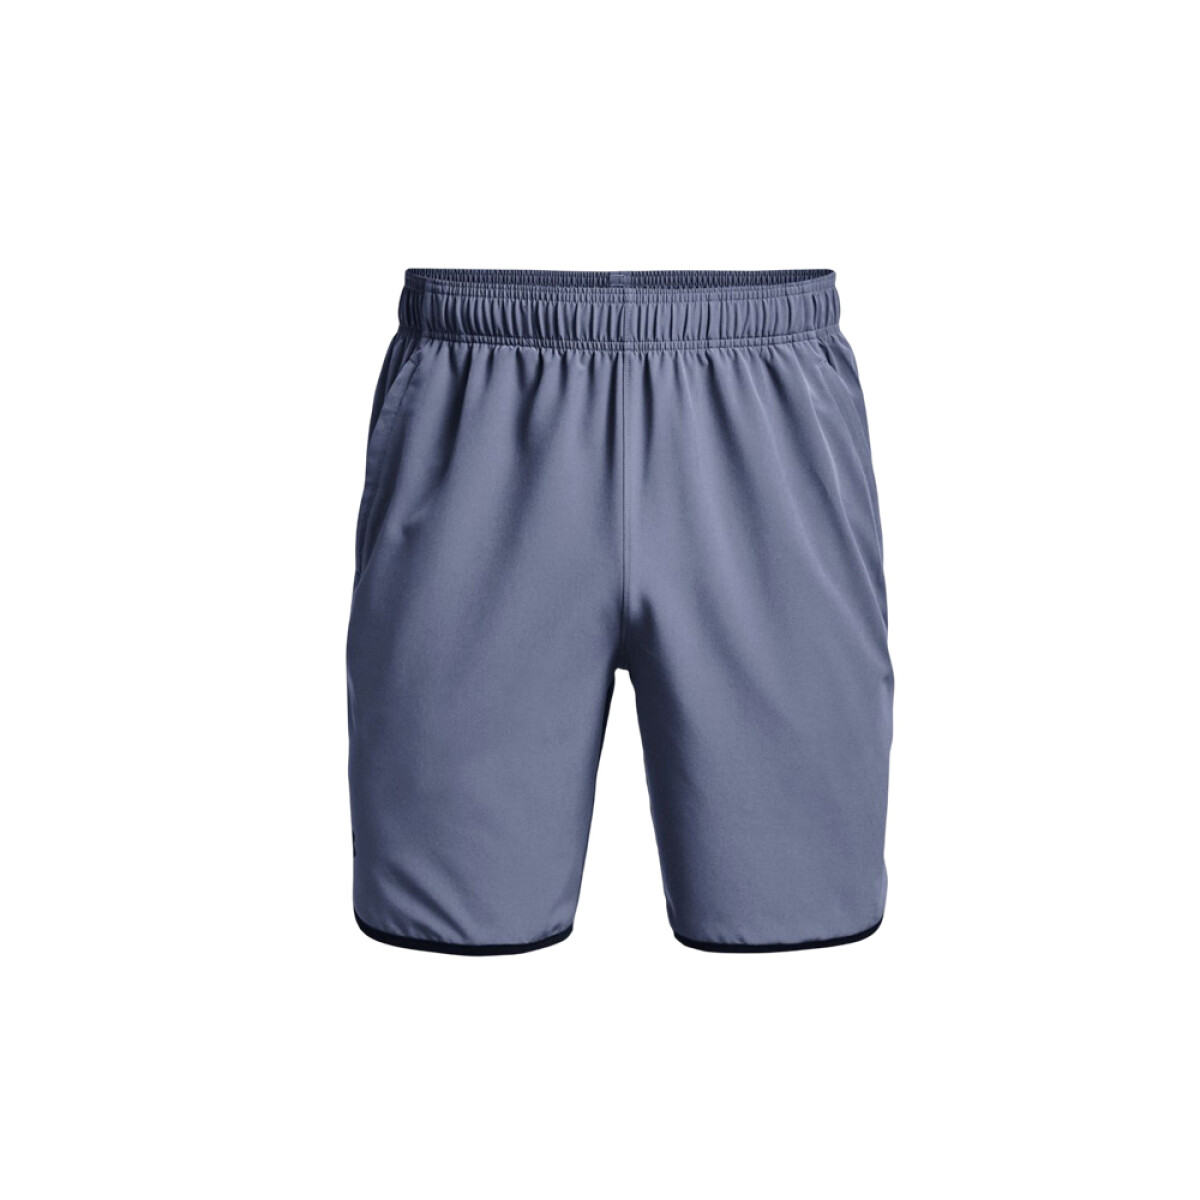 SHORT UNDER ARMOUR HIIT WOVEN - 767 